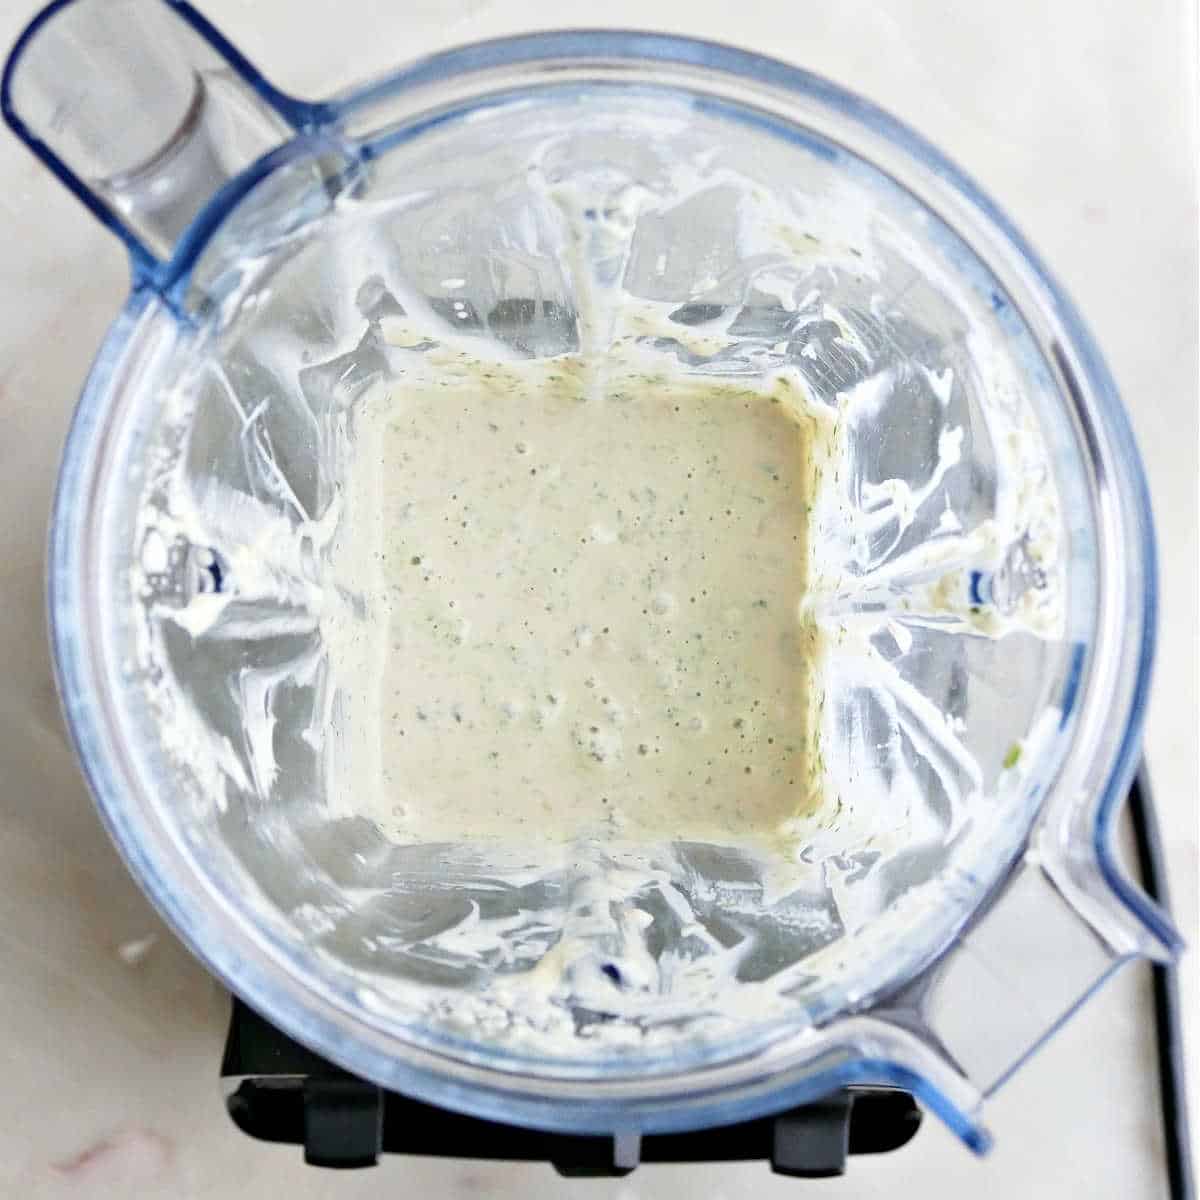 mint tahini sauce after being blended in a high-powered blender on a counter